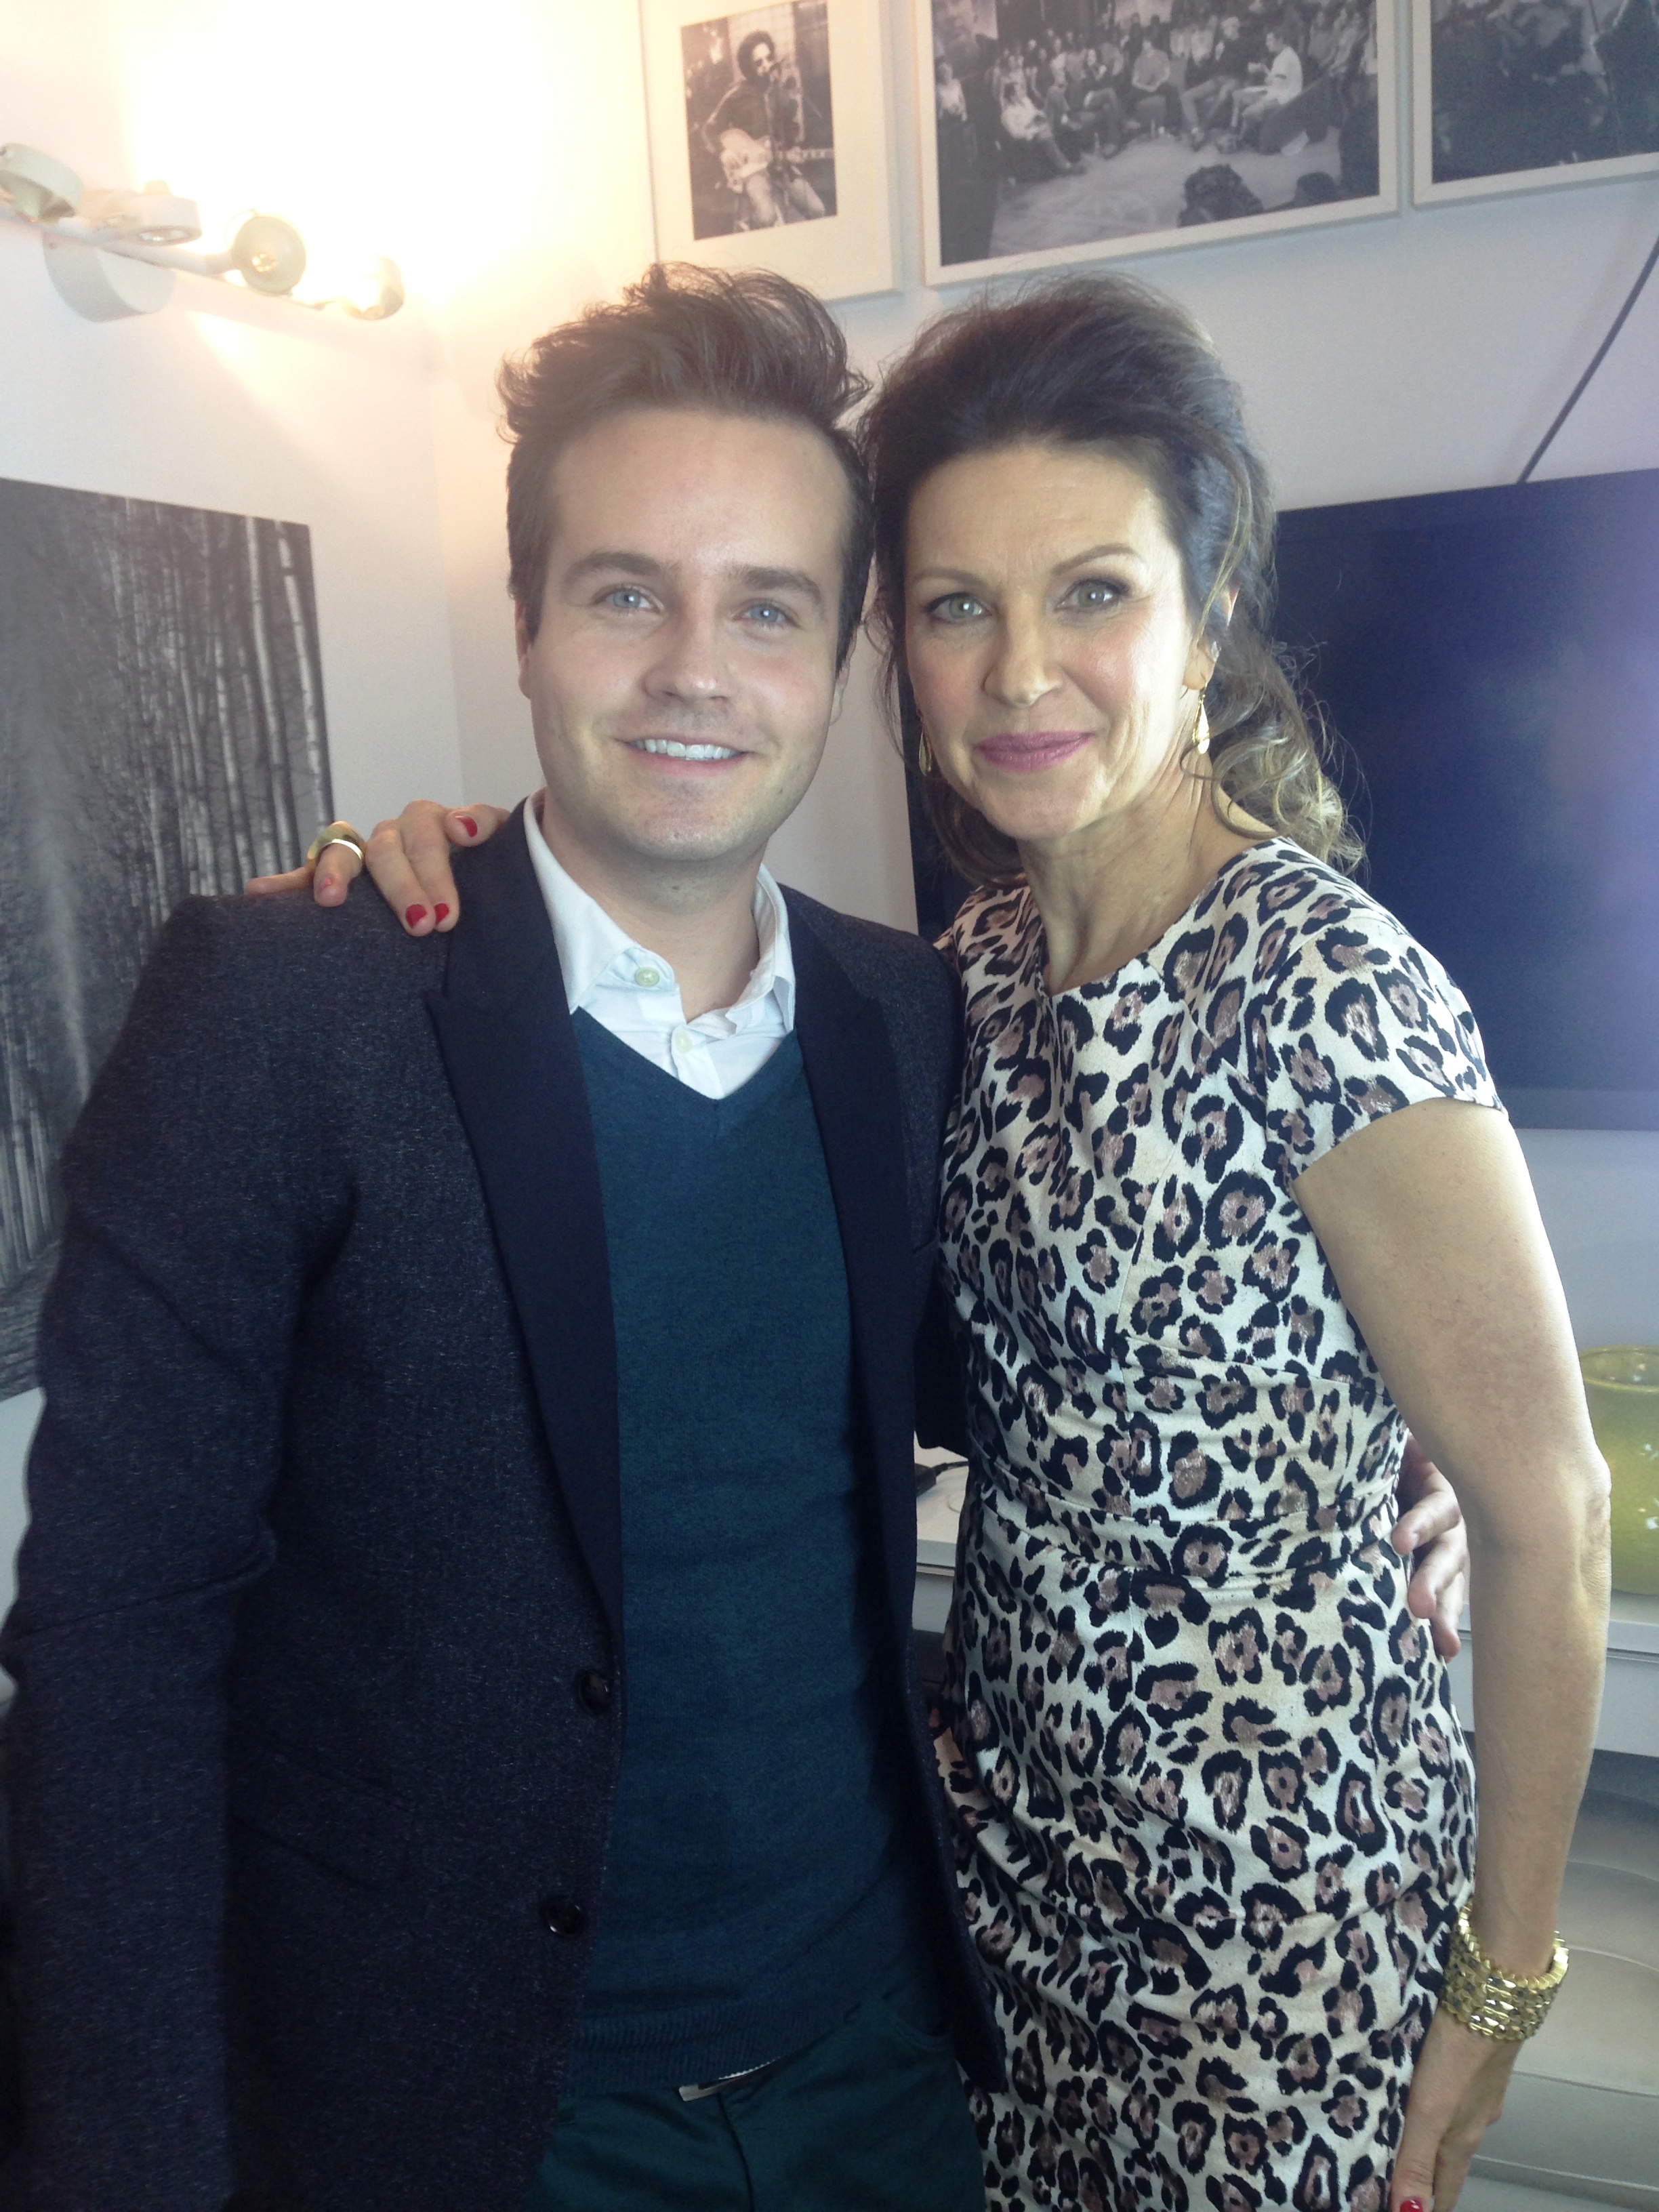 Brandon Ludwig & Wendy Crewson - 299 Queen Street West green room for 'Canadian Star'